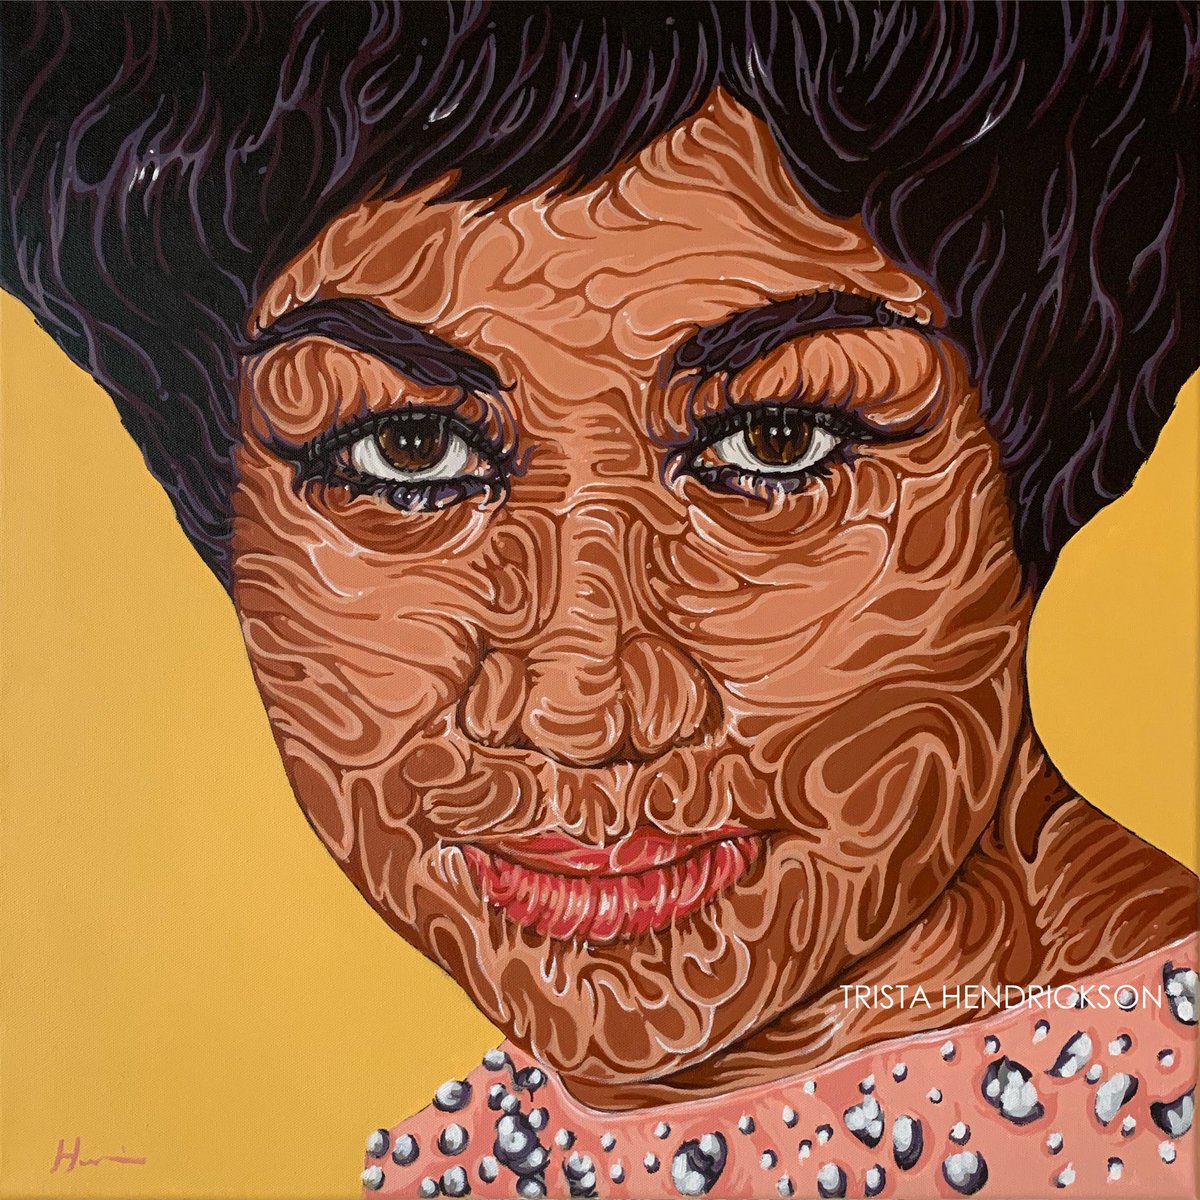 Aretha-A portrait of of Aretha Franklin just completed and available. Contact me to purchase #nempls #nemplsartsdistrict #art #artist #popart #painting #RnBmusic #soulmusic #aretha #arethafranklin #music #Mn #minneapolis #Abstract #casketsrtsbuilding #tristahendrickson